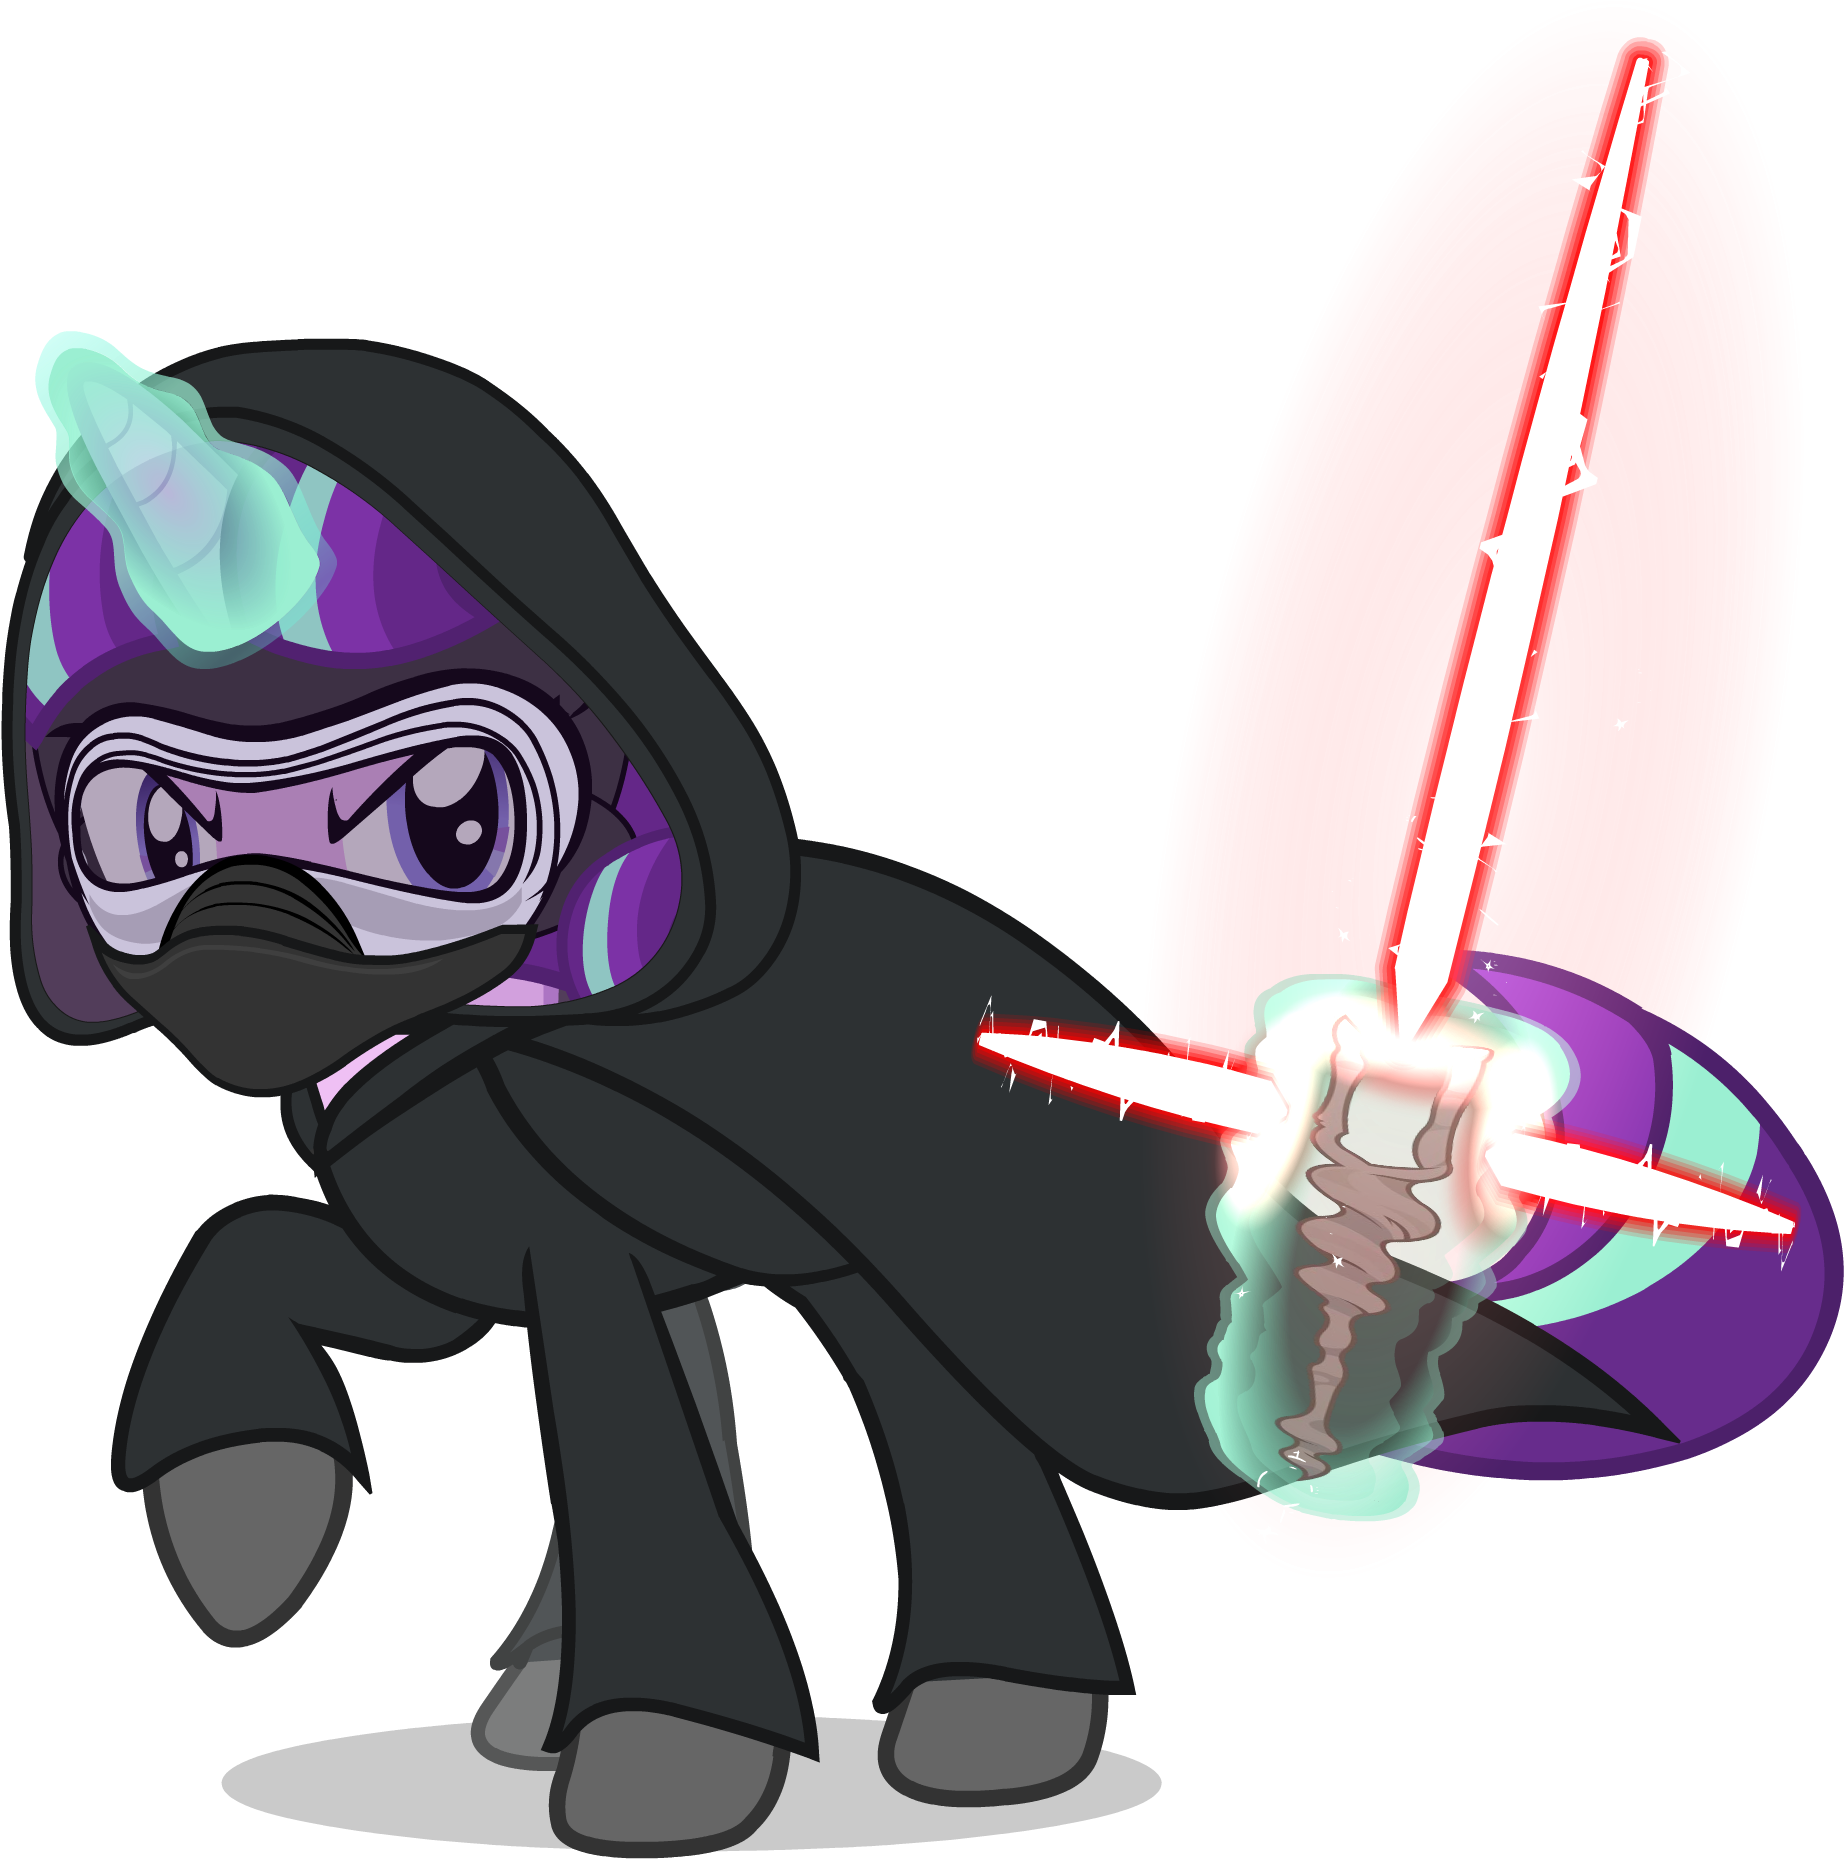 Starlight Glimmer As Kylo Ren Mask And New Saber By - Mlp Star Wars The Force Awakens (1920x1920)